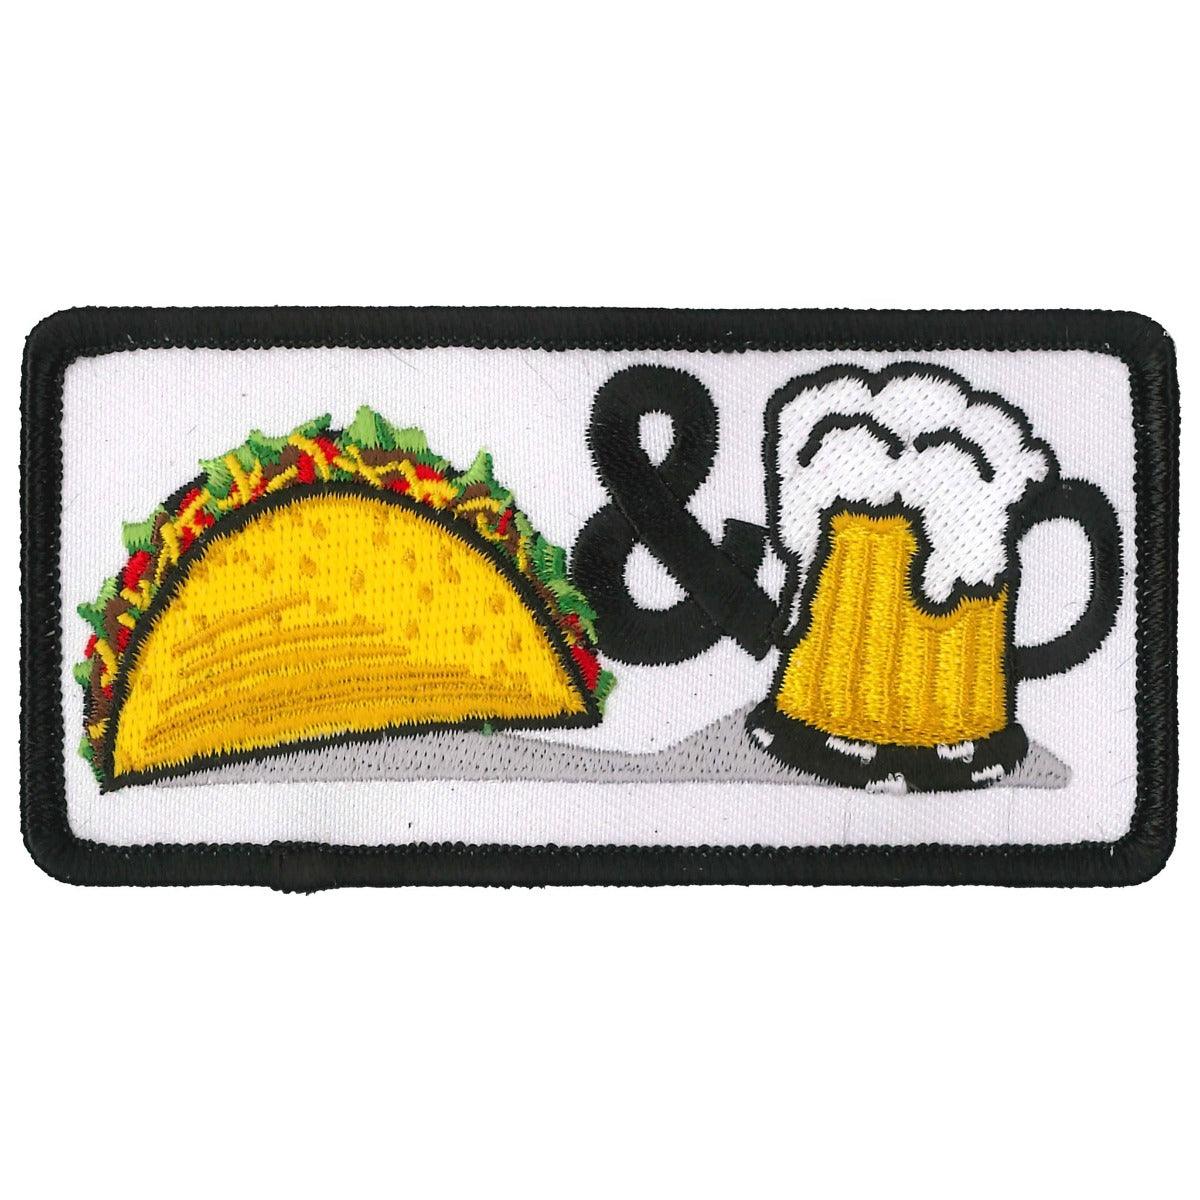 Hot Leathers Taco And Beer Patch - American Legend Rider